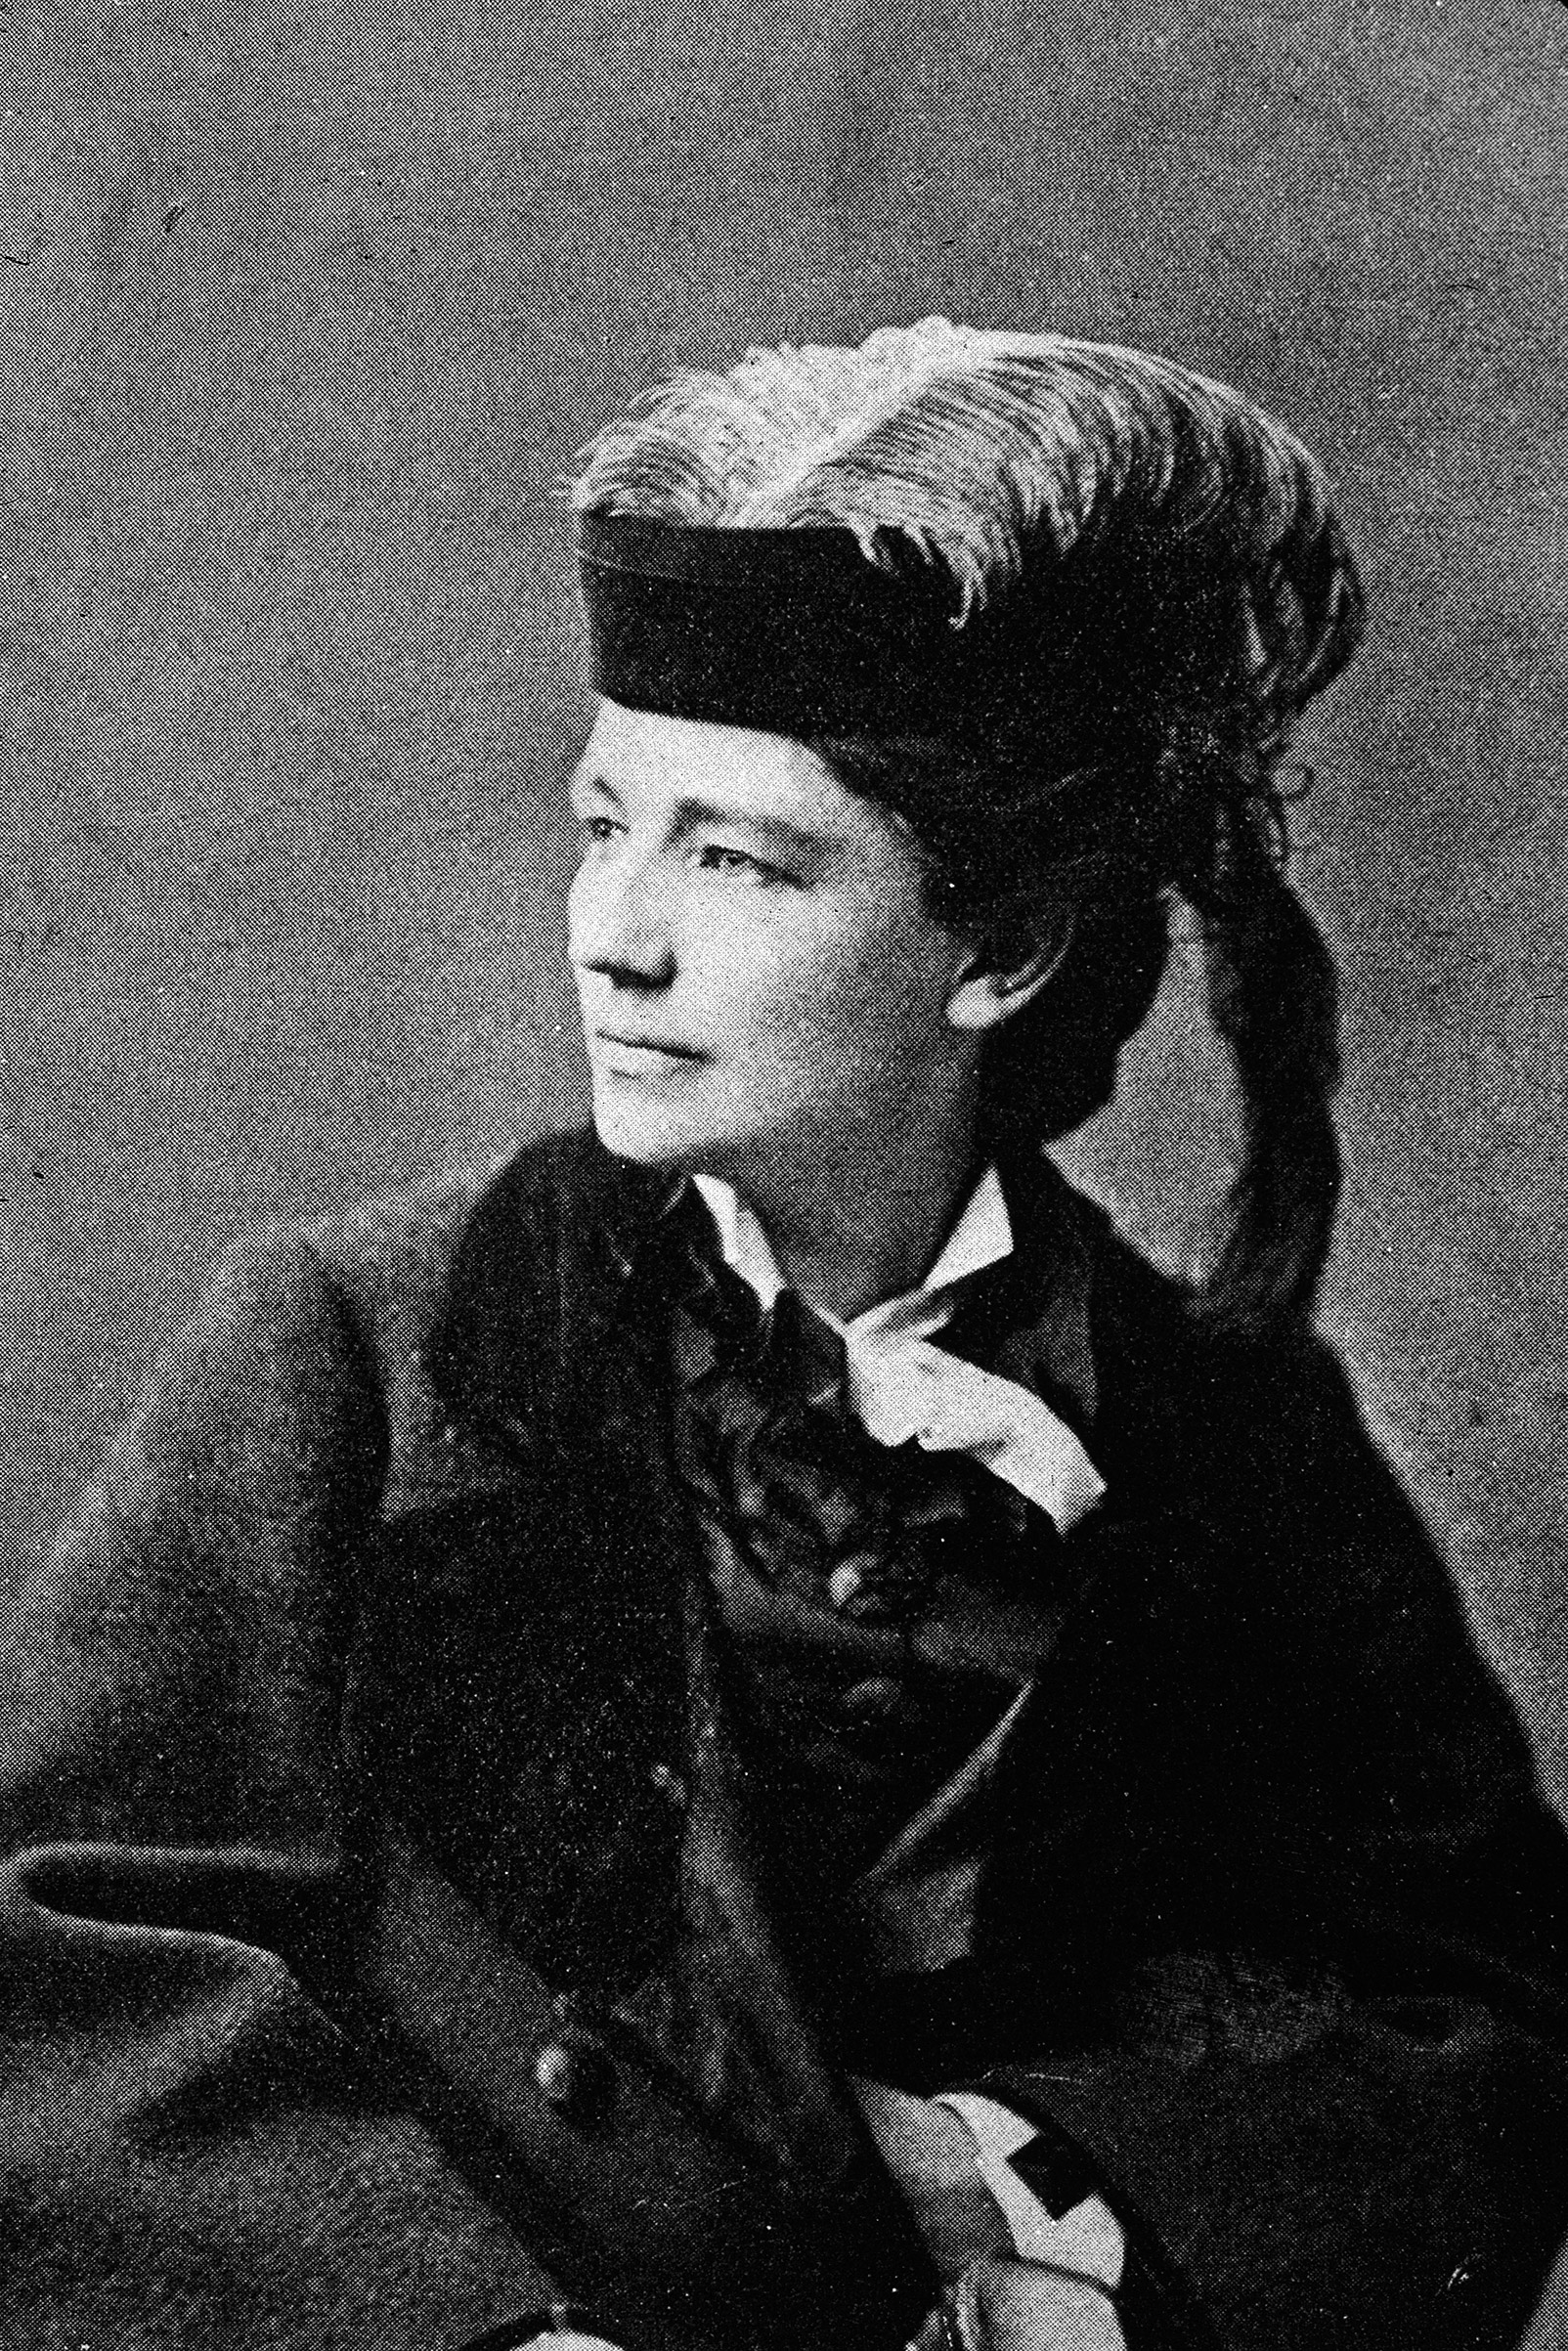 VICTORIA WOODHULL: First female to run for the President of the U.S., 1870.